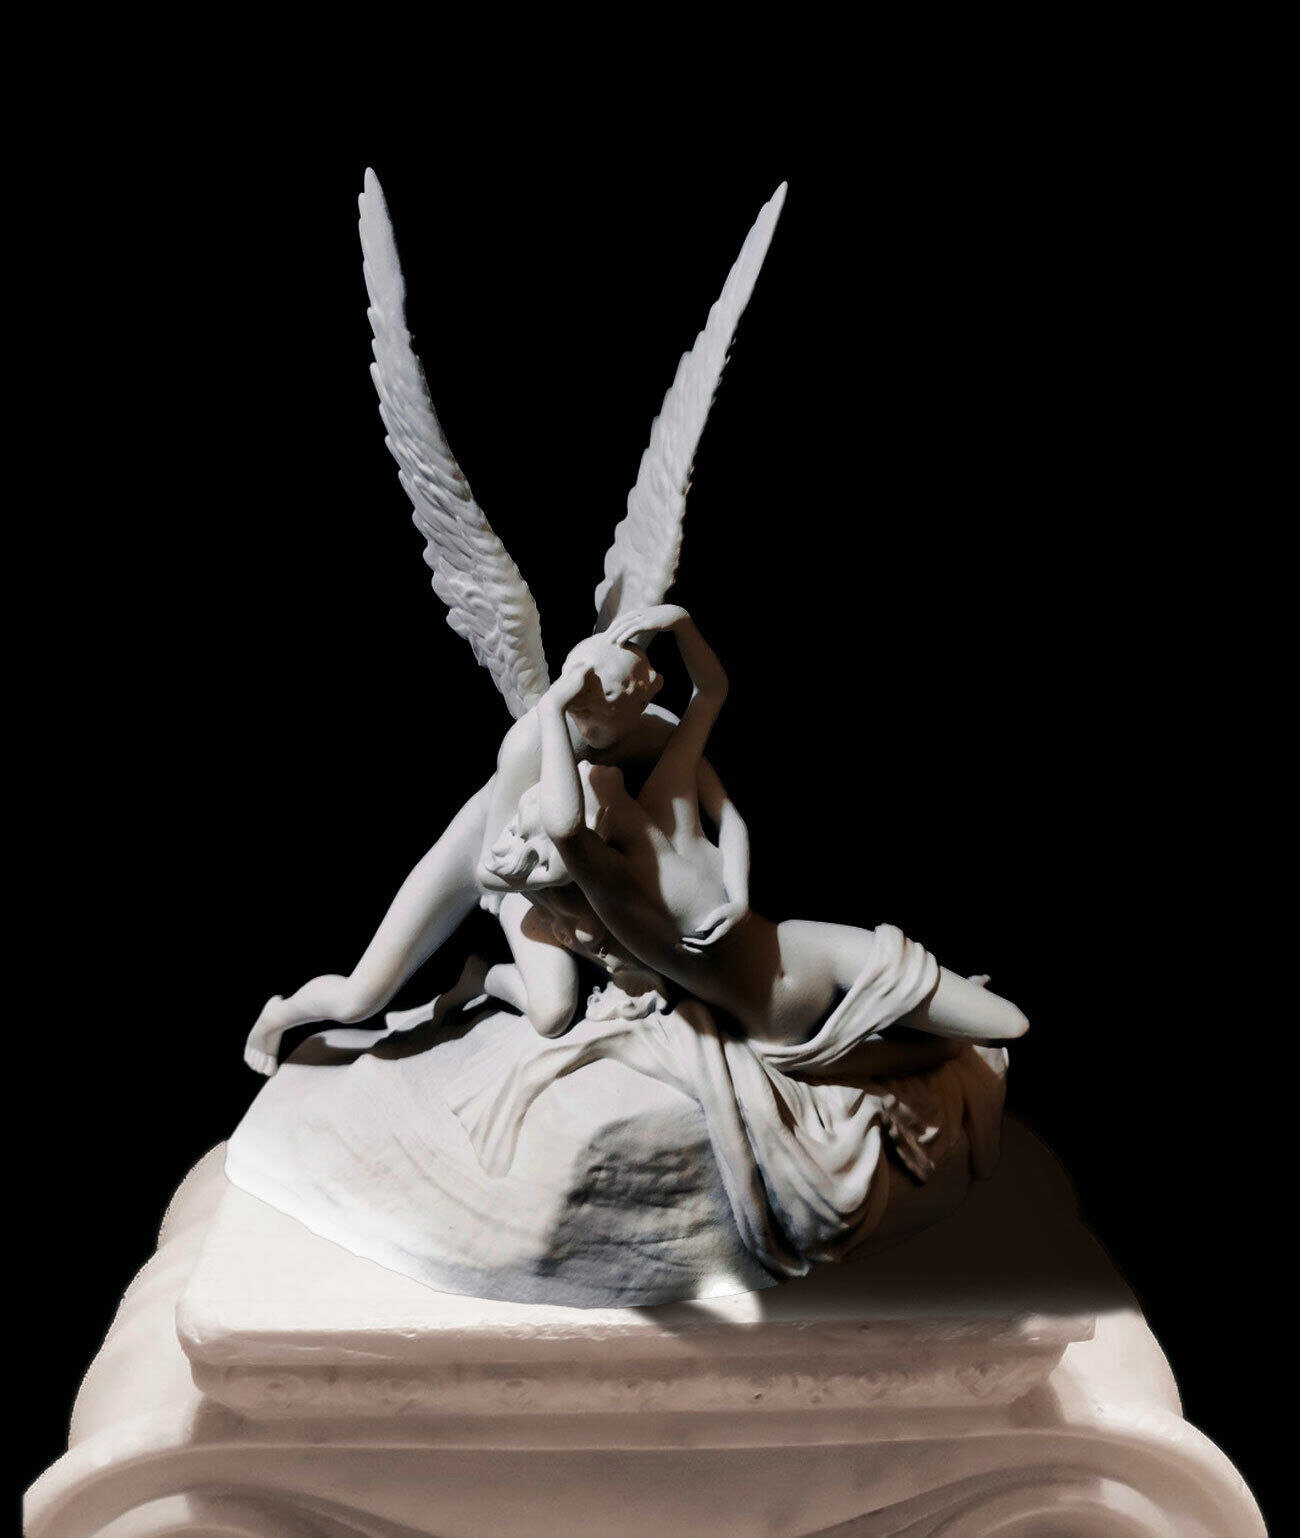 Psyche Revived by Cupid's Kiss. 25 cm. Exact replica . High quality resin